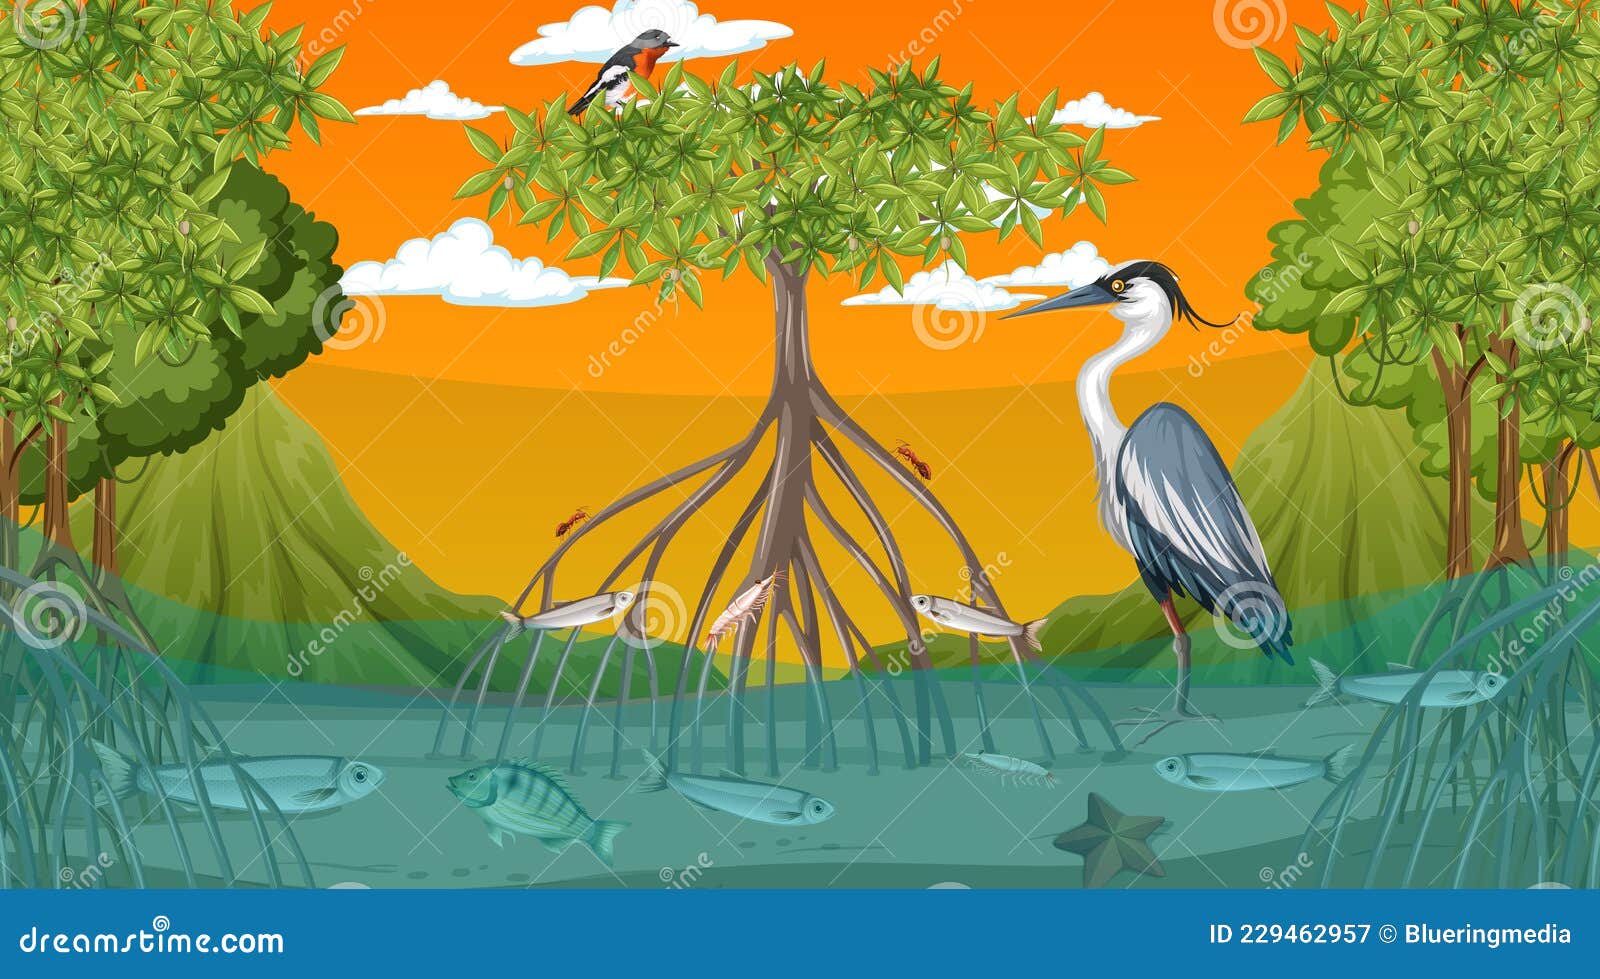 Animals Live in Mangrove Forest at Sunset Time Scene Stock Vector -  Illustration of leaf, animals: 229462957